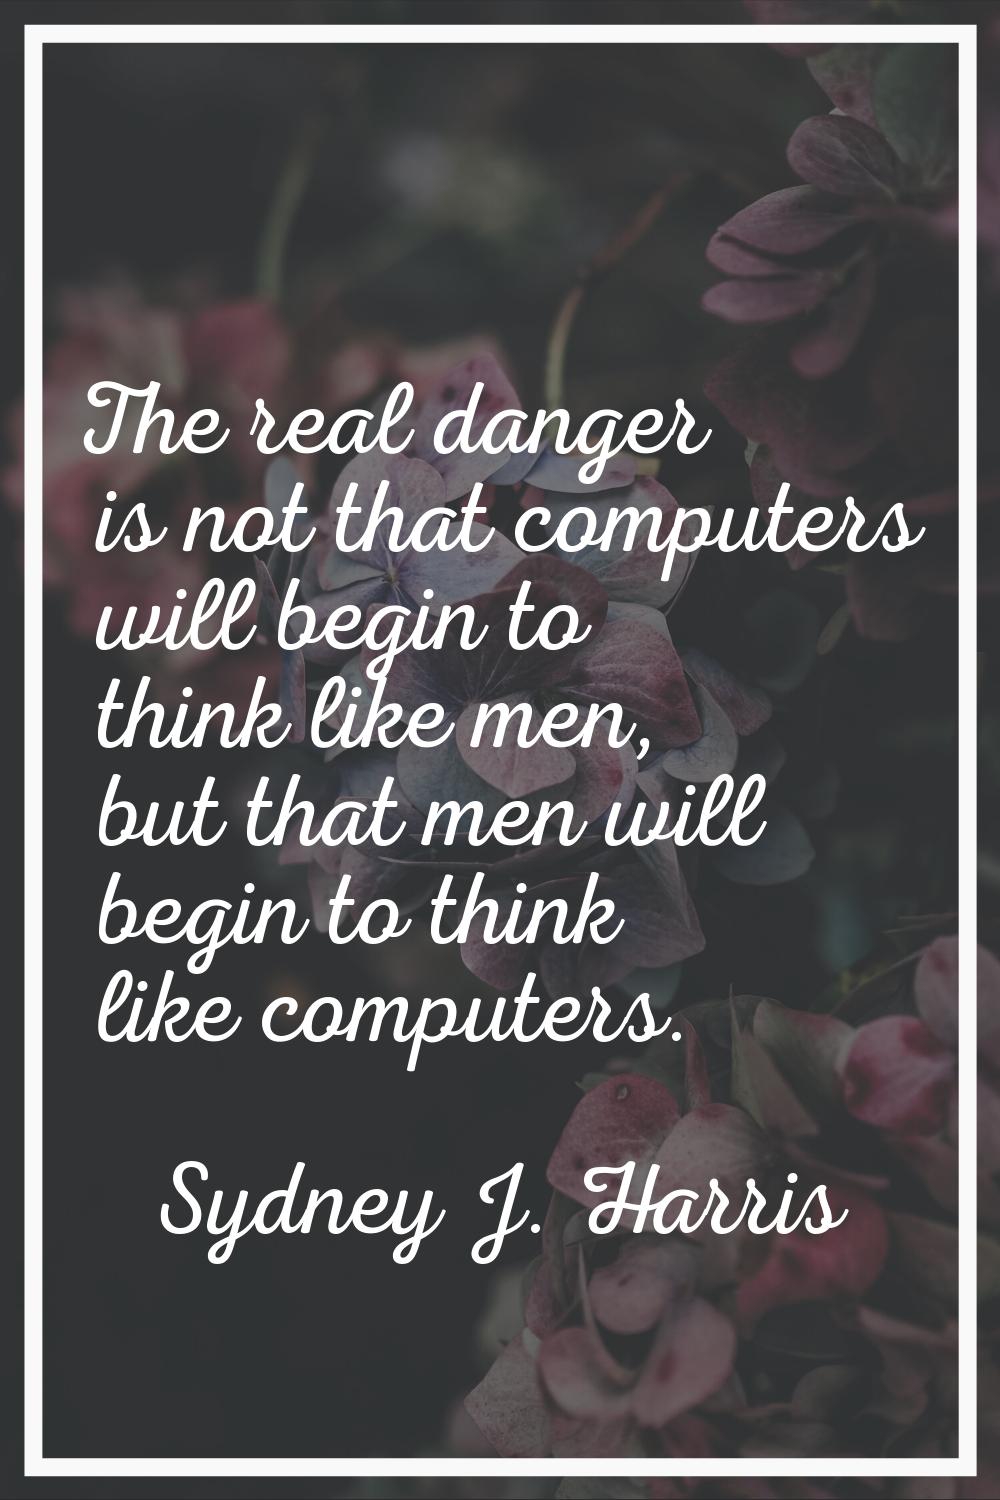 The real danger is not that computers will begin to think like men, but that men will begin to thin